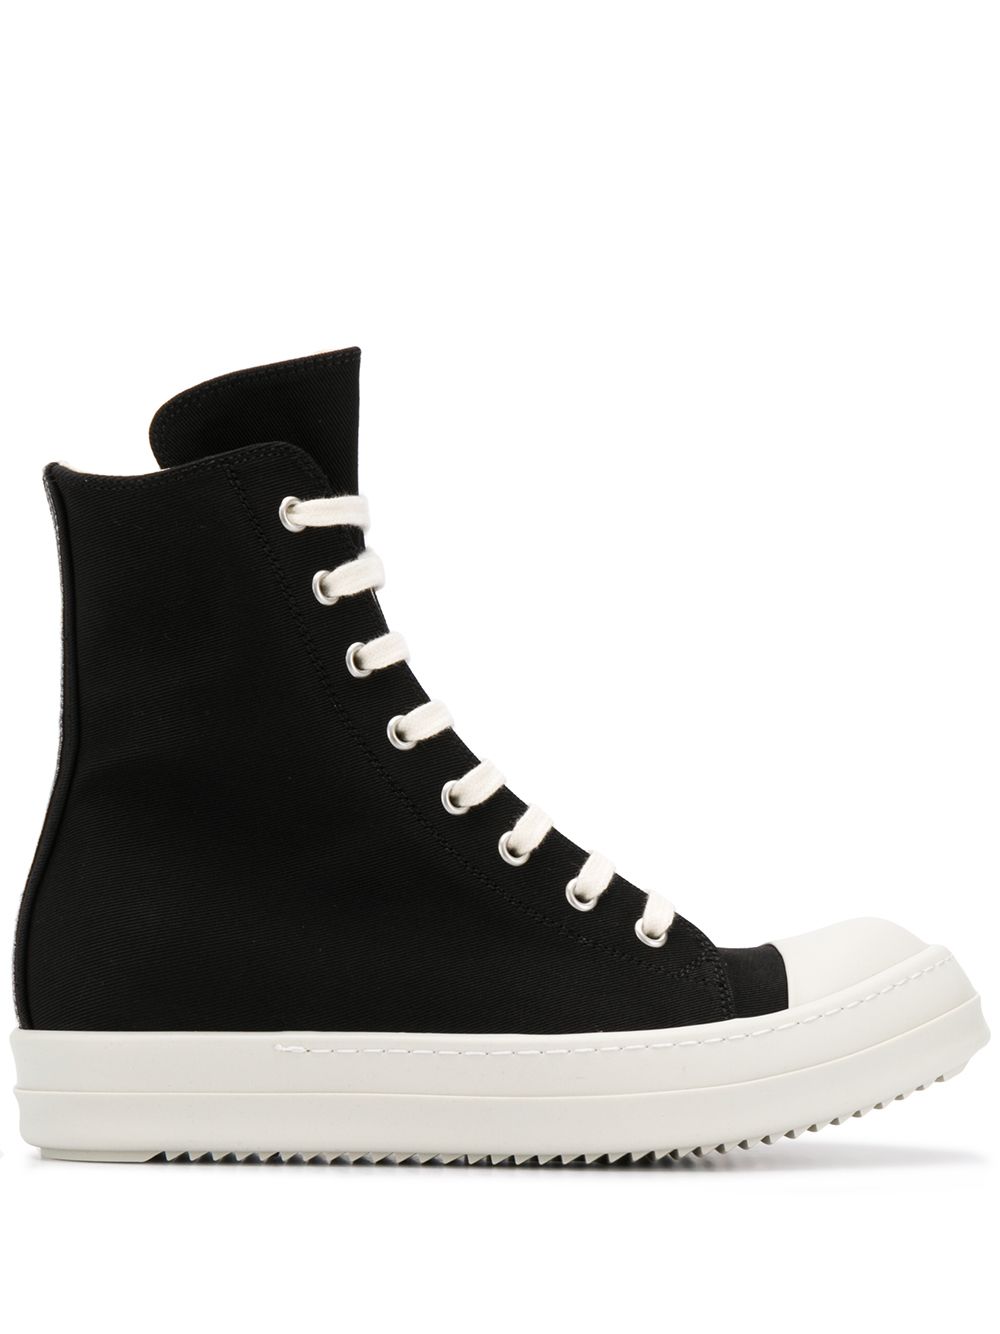 RICK OWENS DRKSHDW HIGH-TOP CANVAS TRAINERS